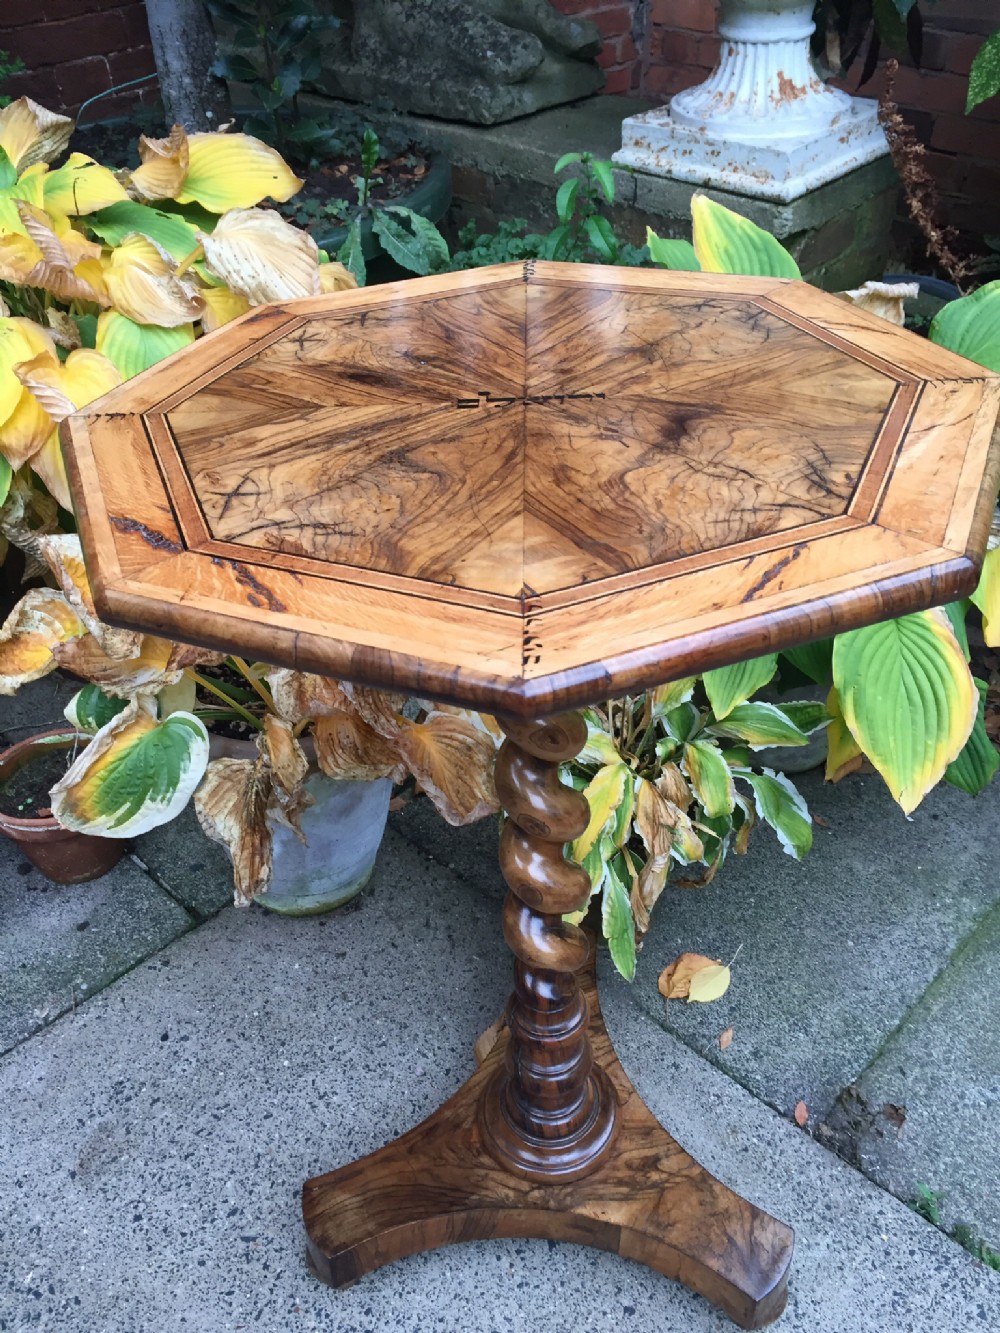 rare c19th olivewood pedestal table from the holy land with hebrew ink inscriptions